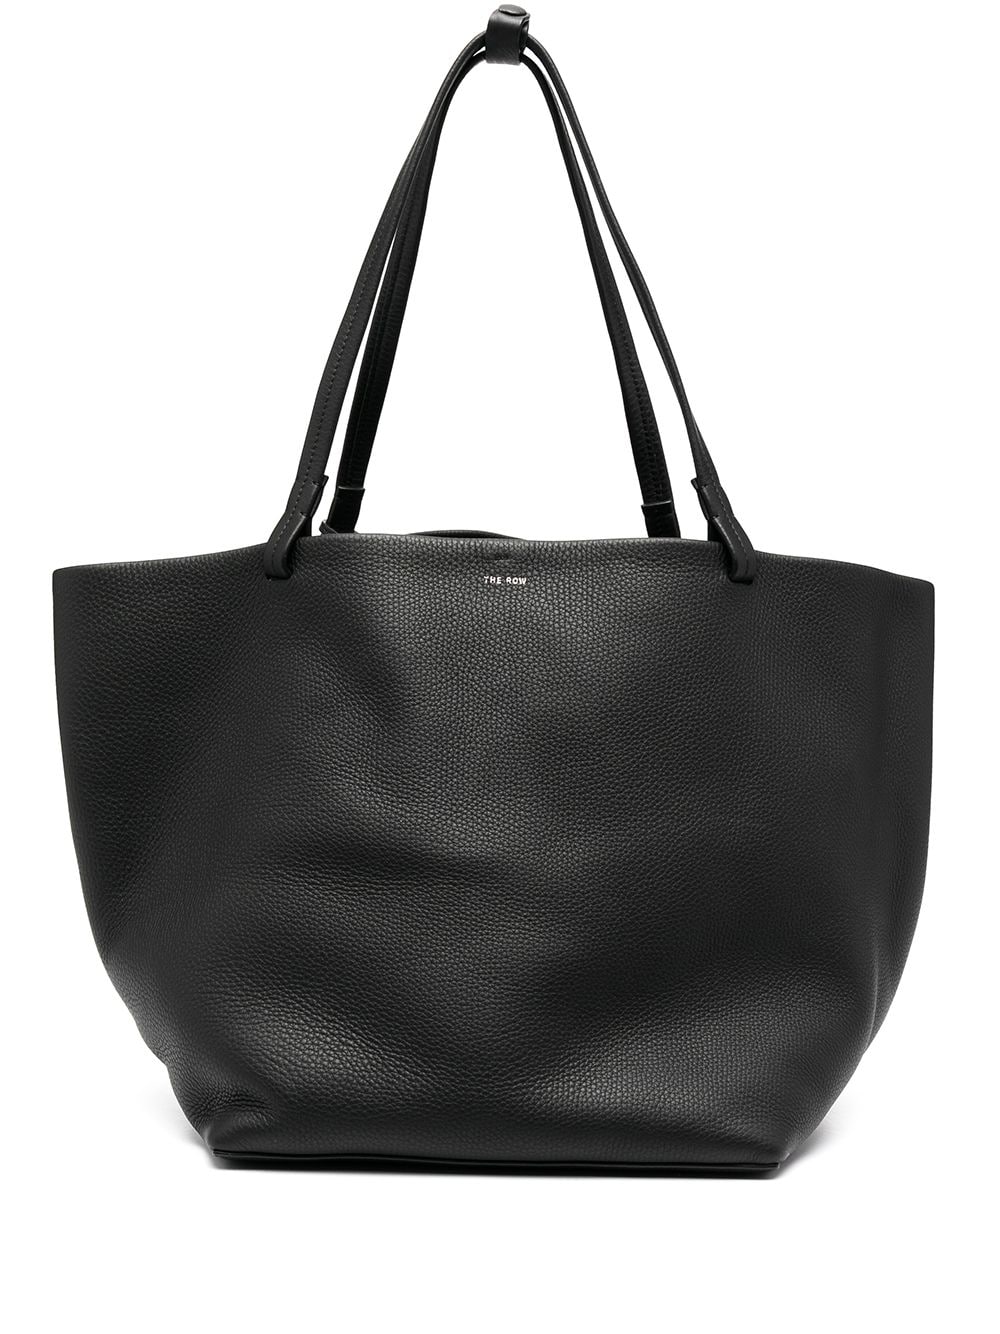 THE ROW PARK SMALL TEXTURED TOTE BAG